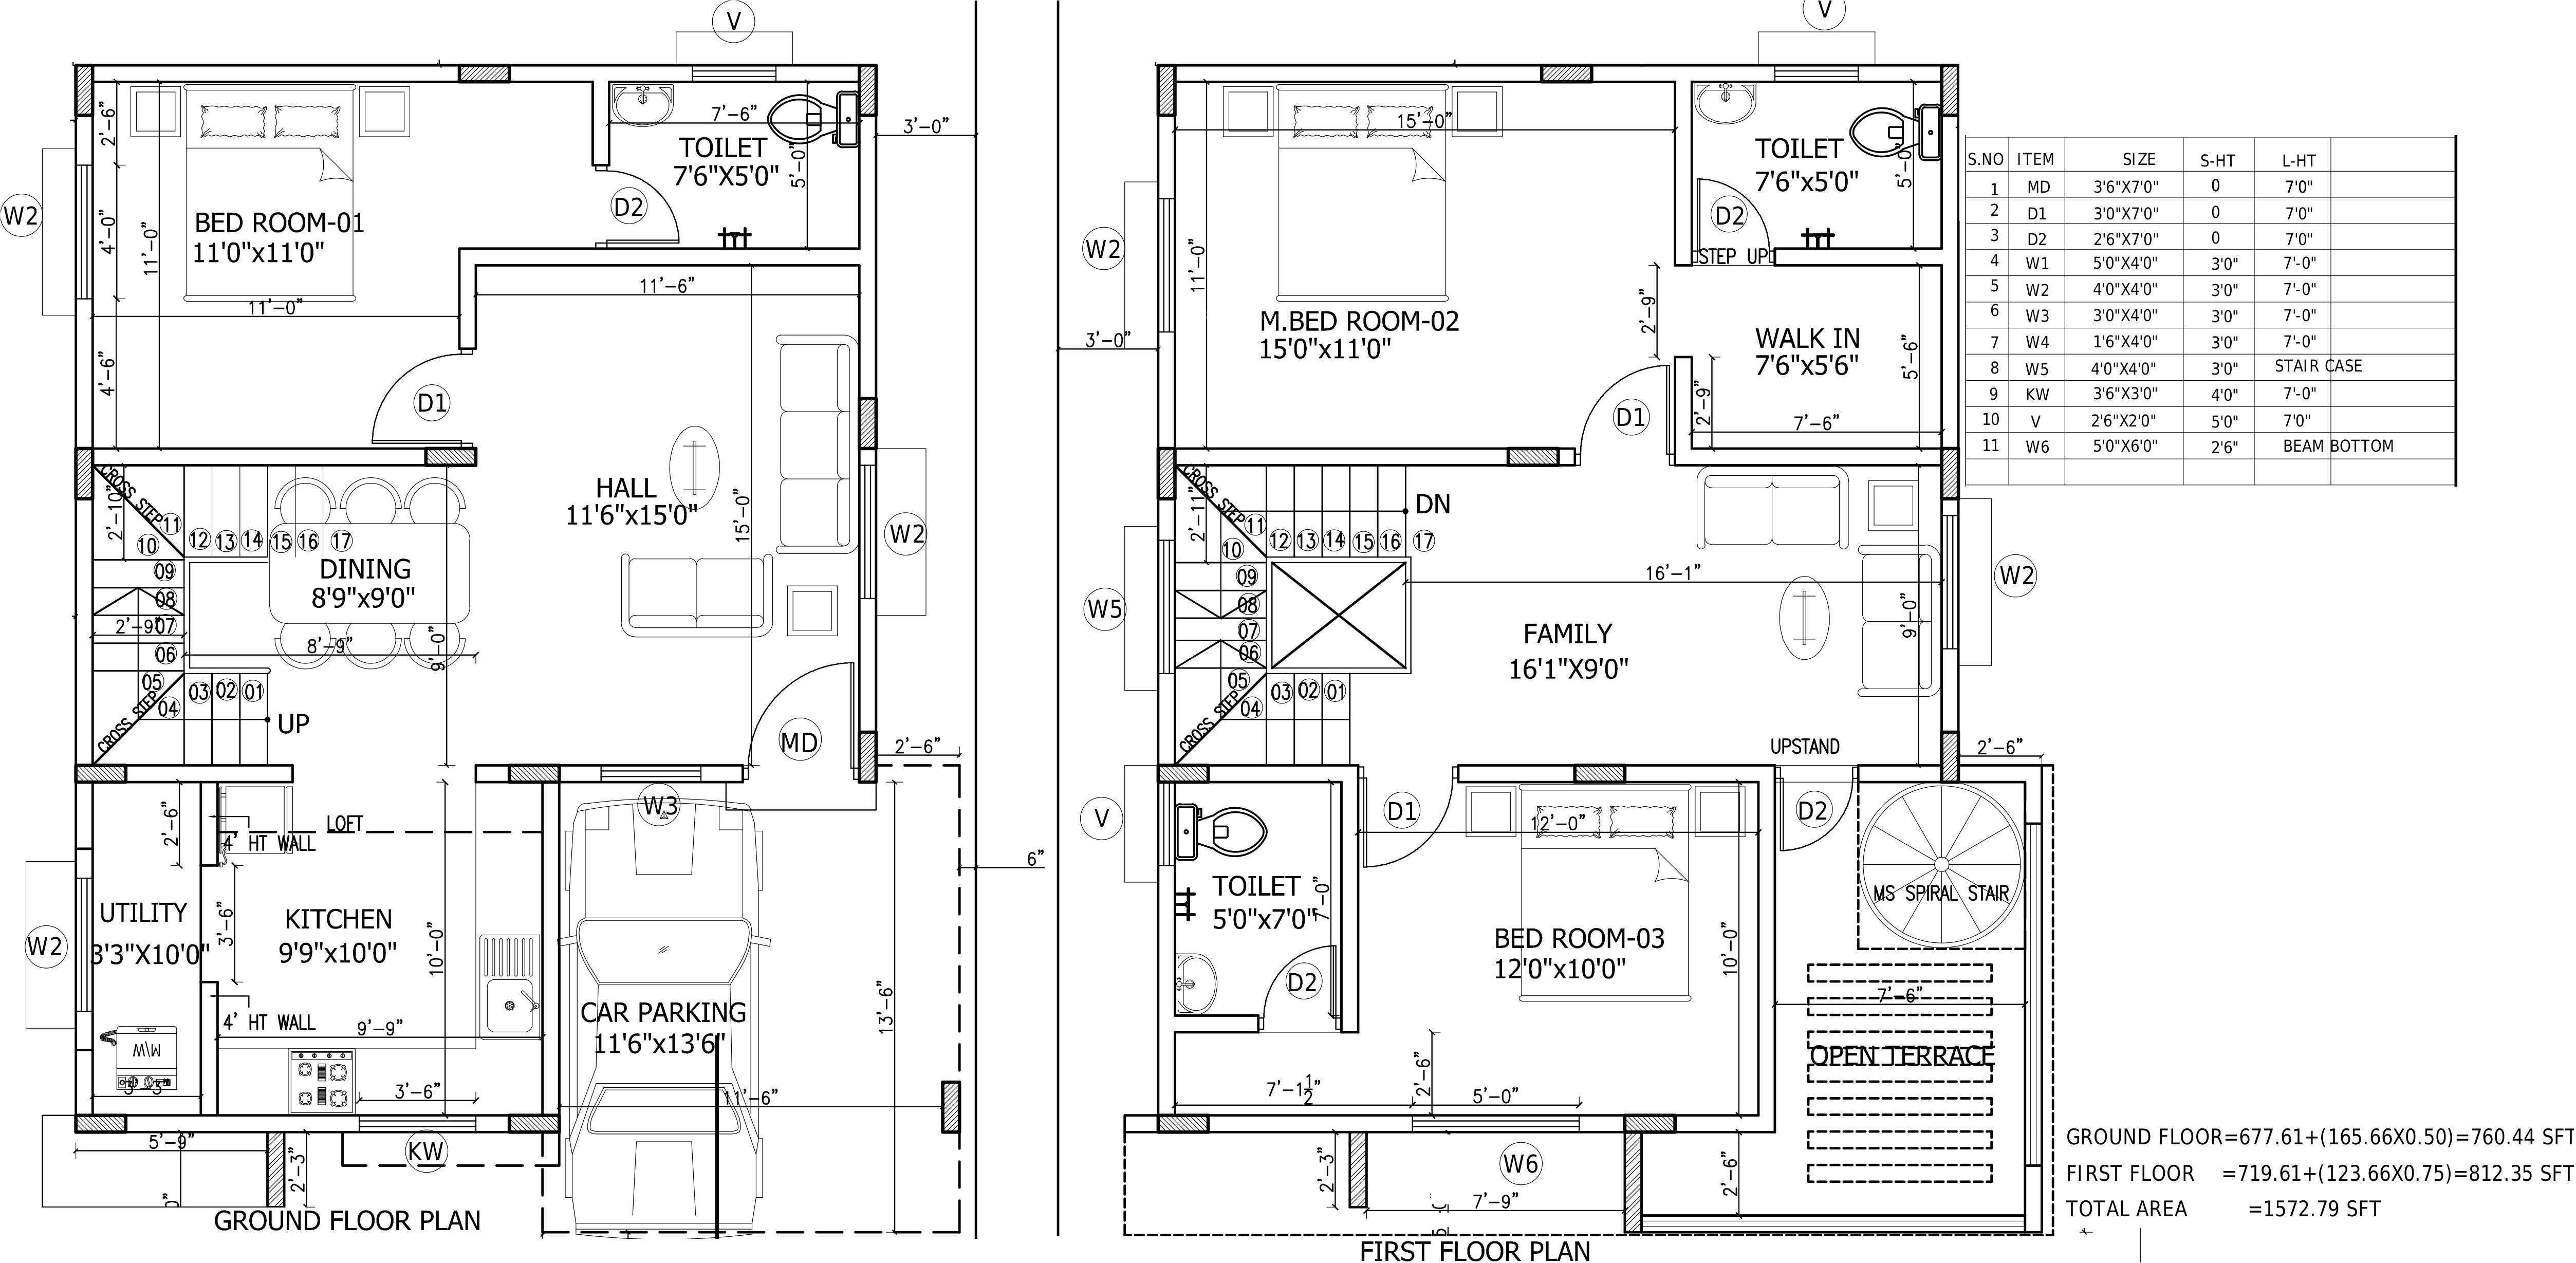 1974 mobile home floor plans awesome double wide mobile homes